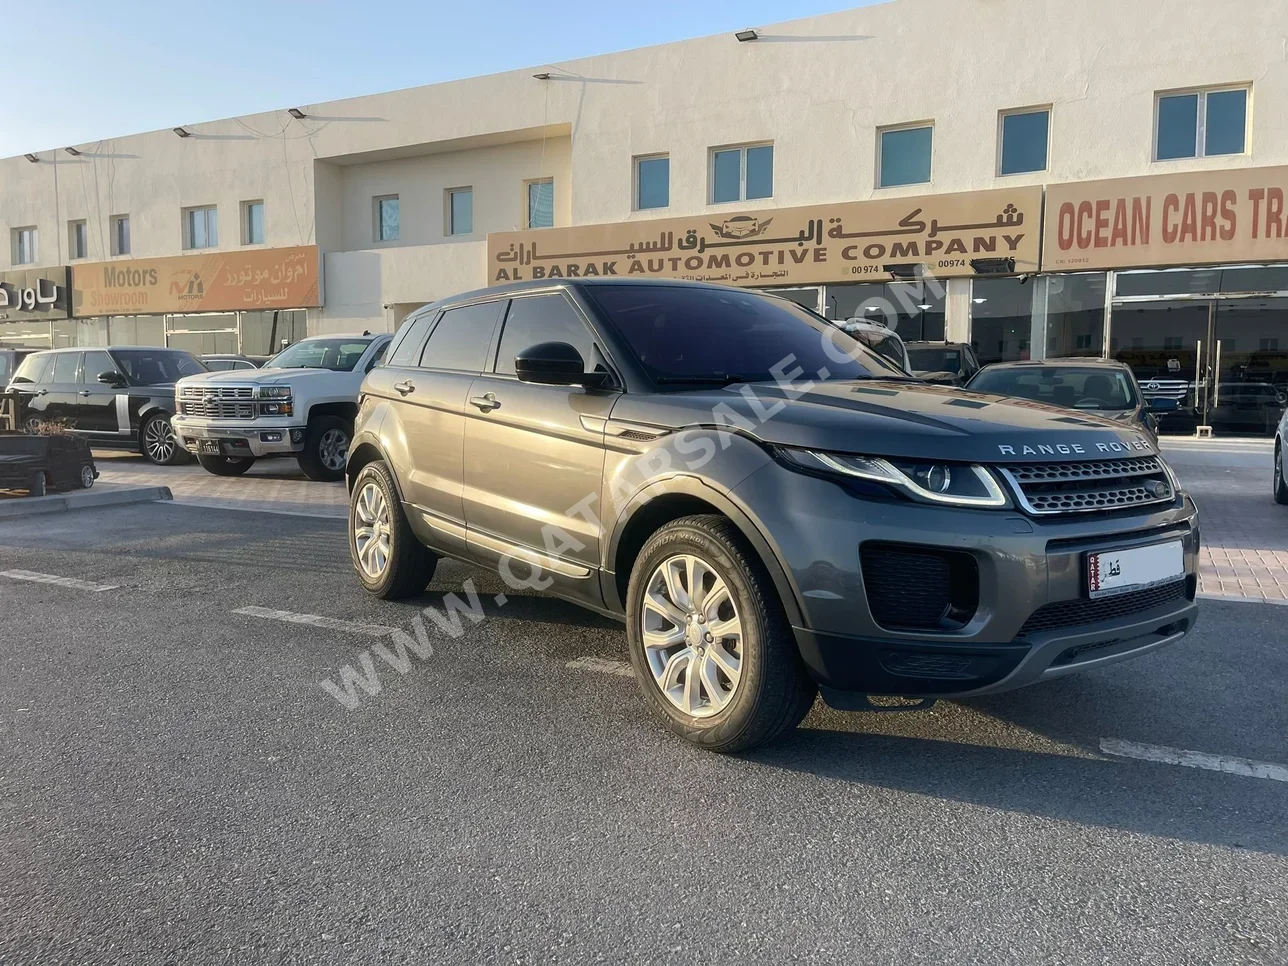  Land Rover  Evoque  2019  Automatic  125,000 Km  4 Cylinder  Four Wheel Drive (4WD)  SUV  Gray  With Warranty